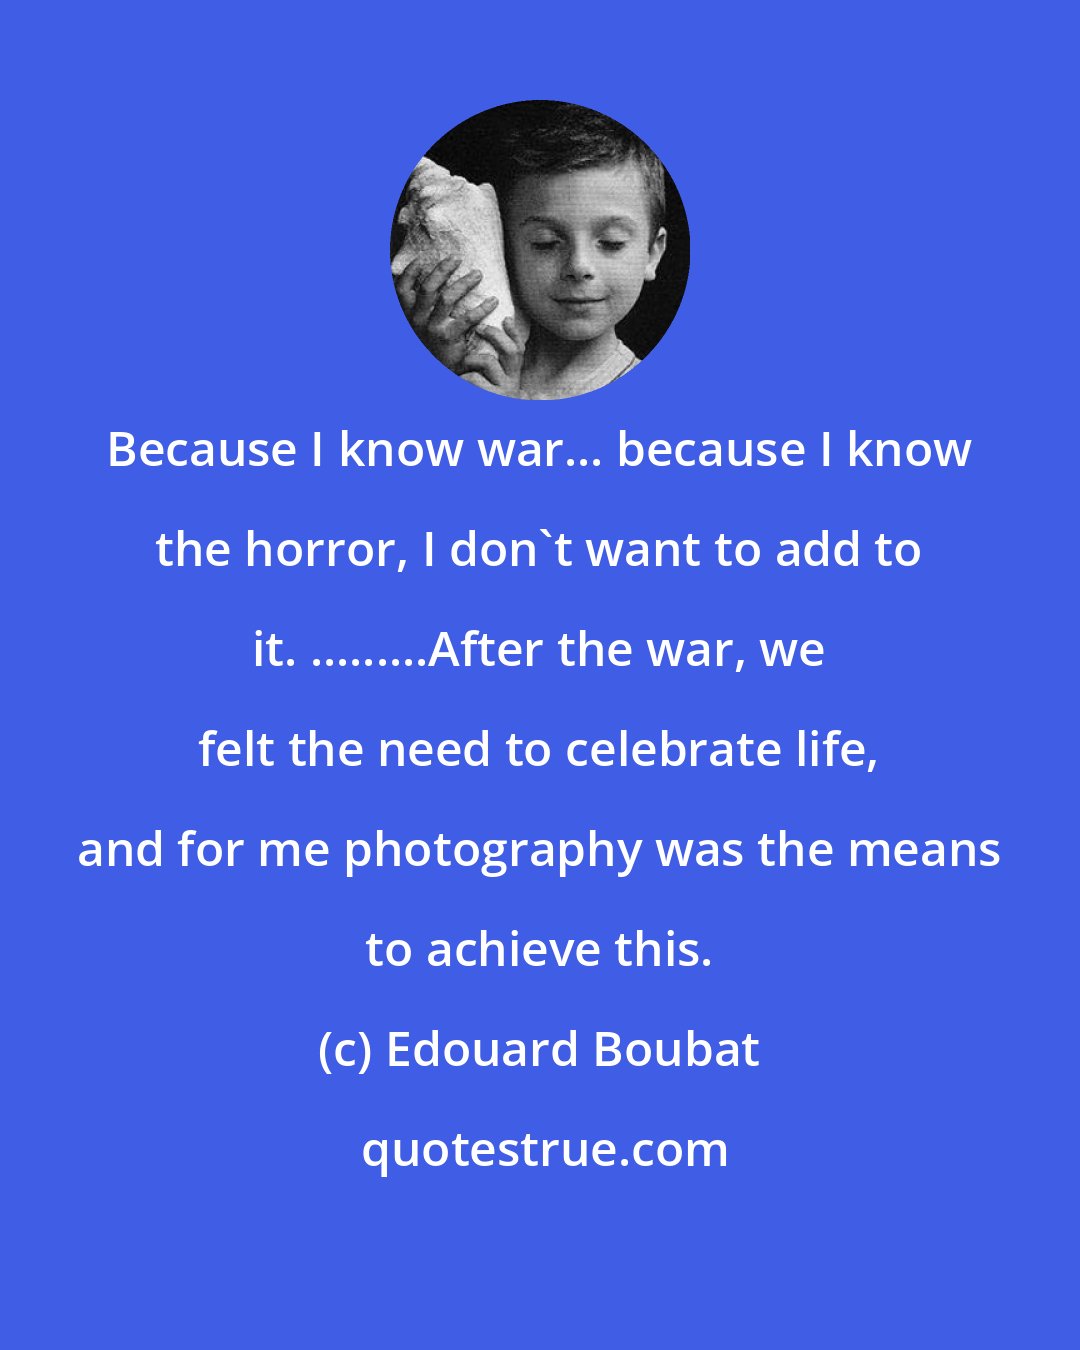 Edouard Boubat: Because I know war... because I know the horror, I don't want to add to it. .........After the war, we felt the need to celebrate life, and for me photography was the means to achieve this.